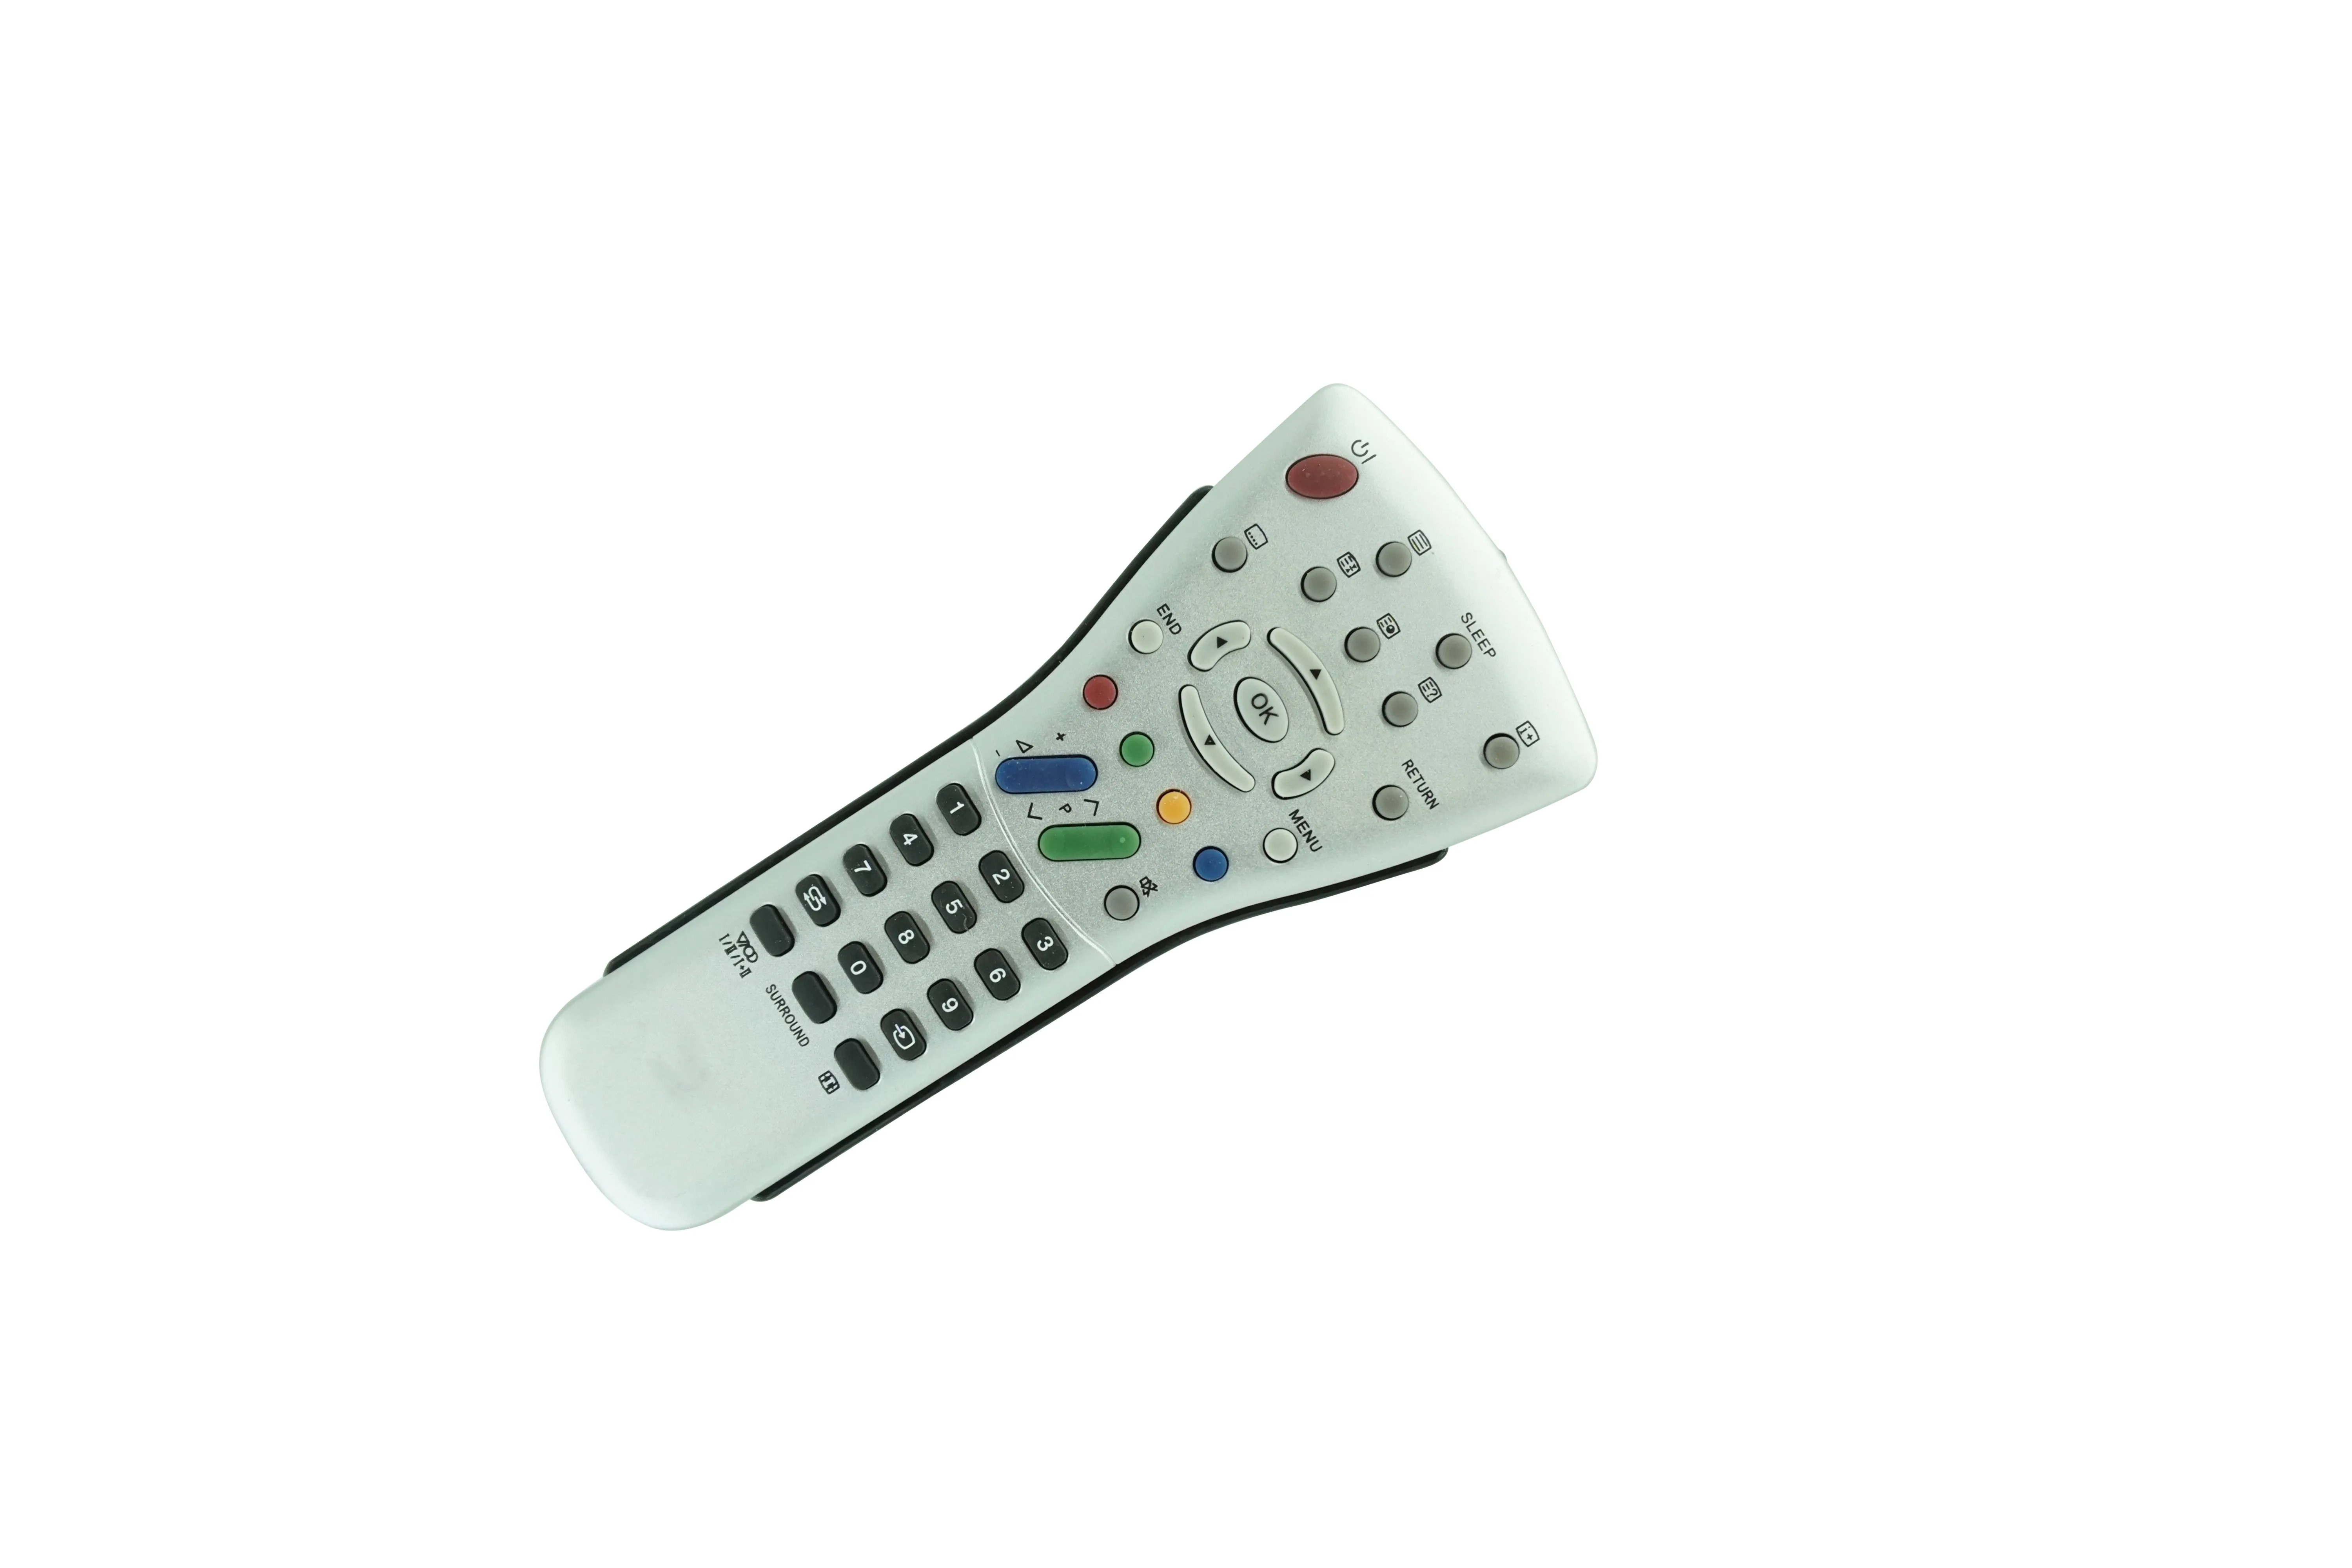 

Remote Control For Sharp LC-15B4USM LC-15L1US LC-20B4U LC-20B4UB LC-20B4US LC-20B4USLC-20B4USM AQUOS Smart LED LCD HDTV TV